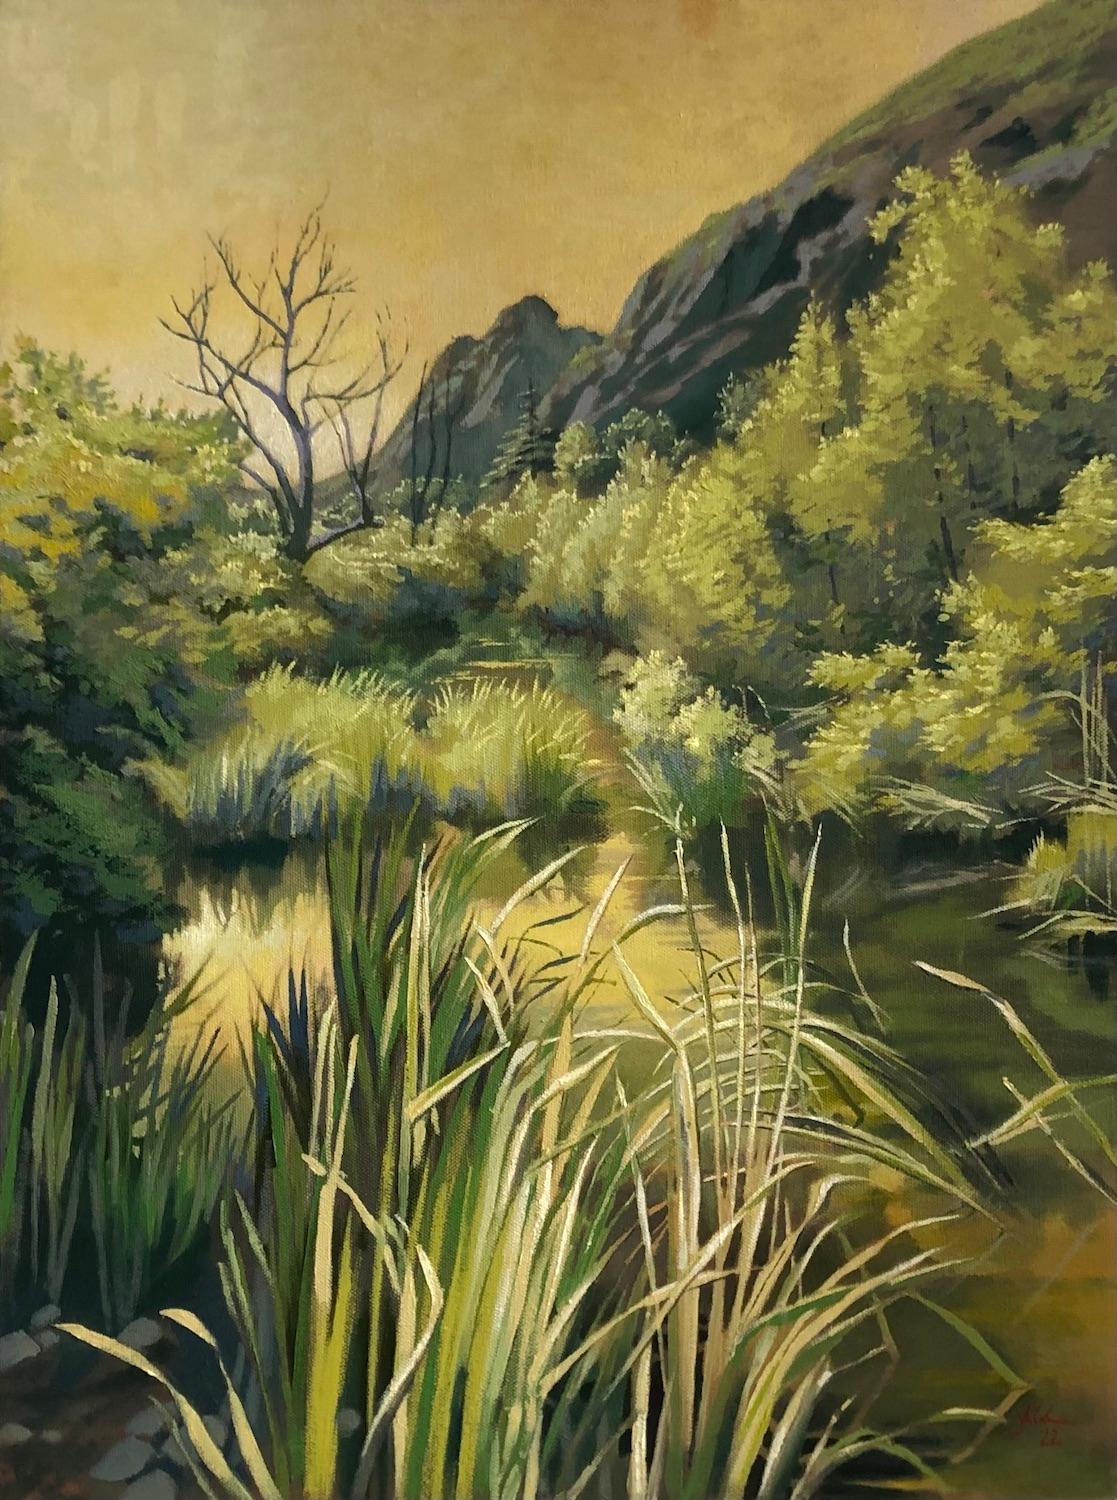 Willows Winding on a Creek, Oil Painting - Art by Jesse Aldana